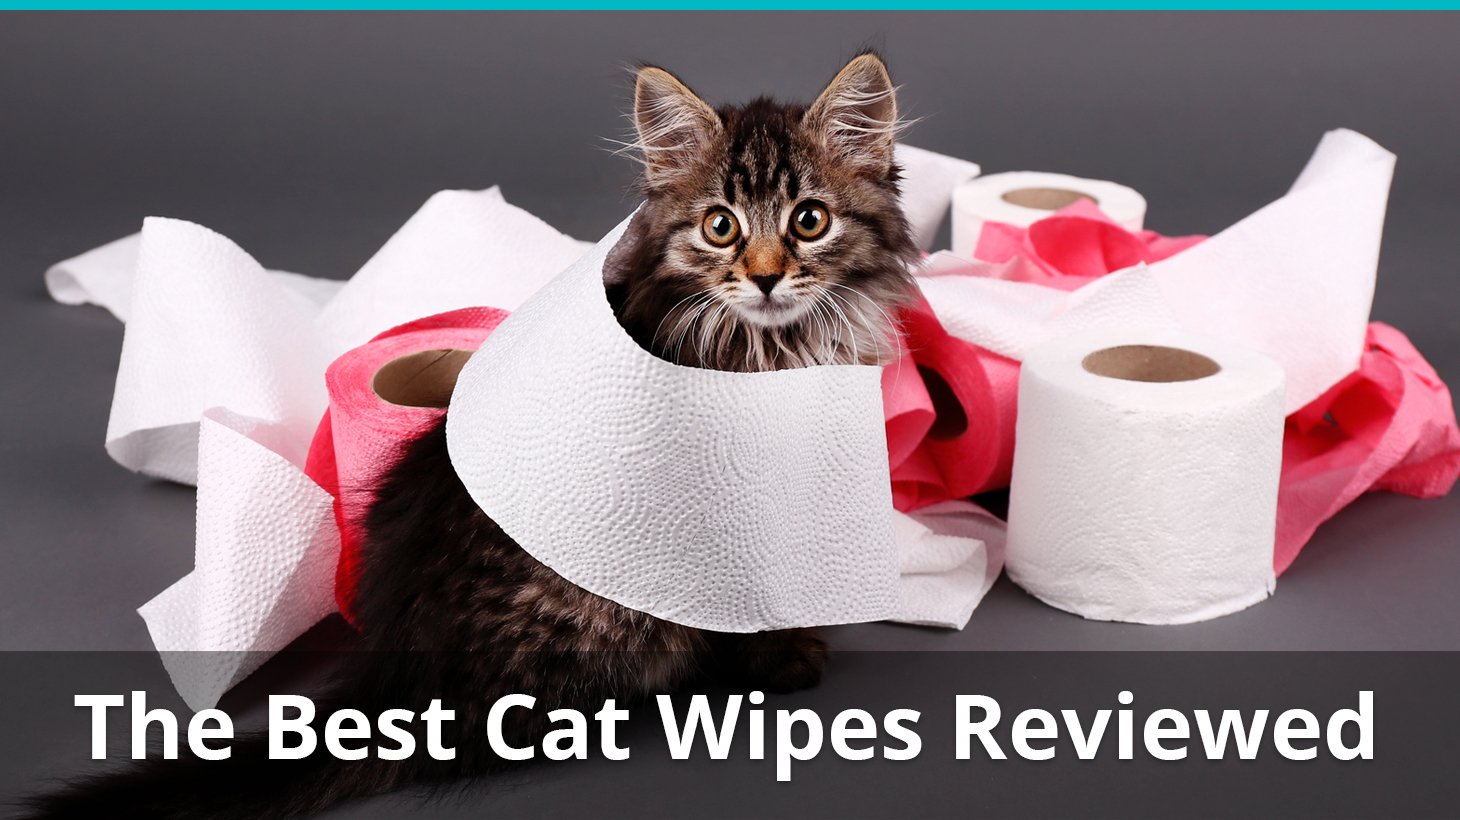 baby wipes safe for cats